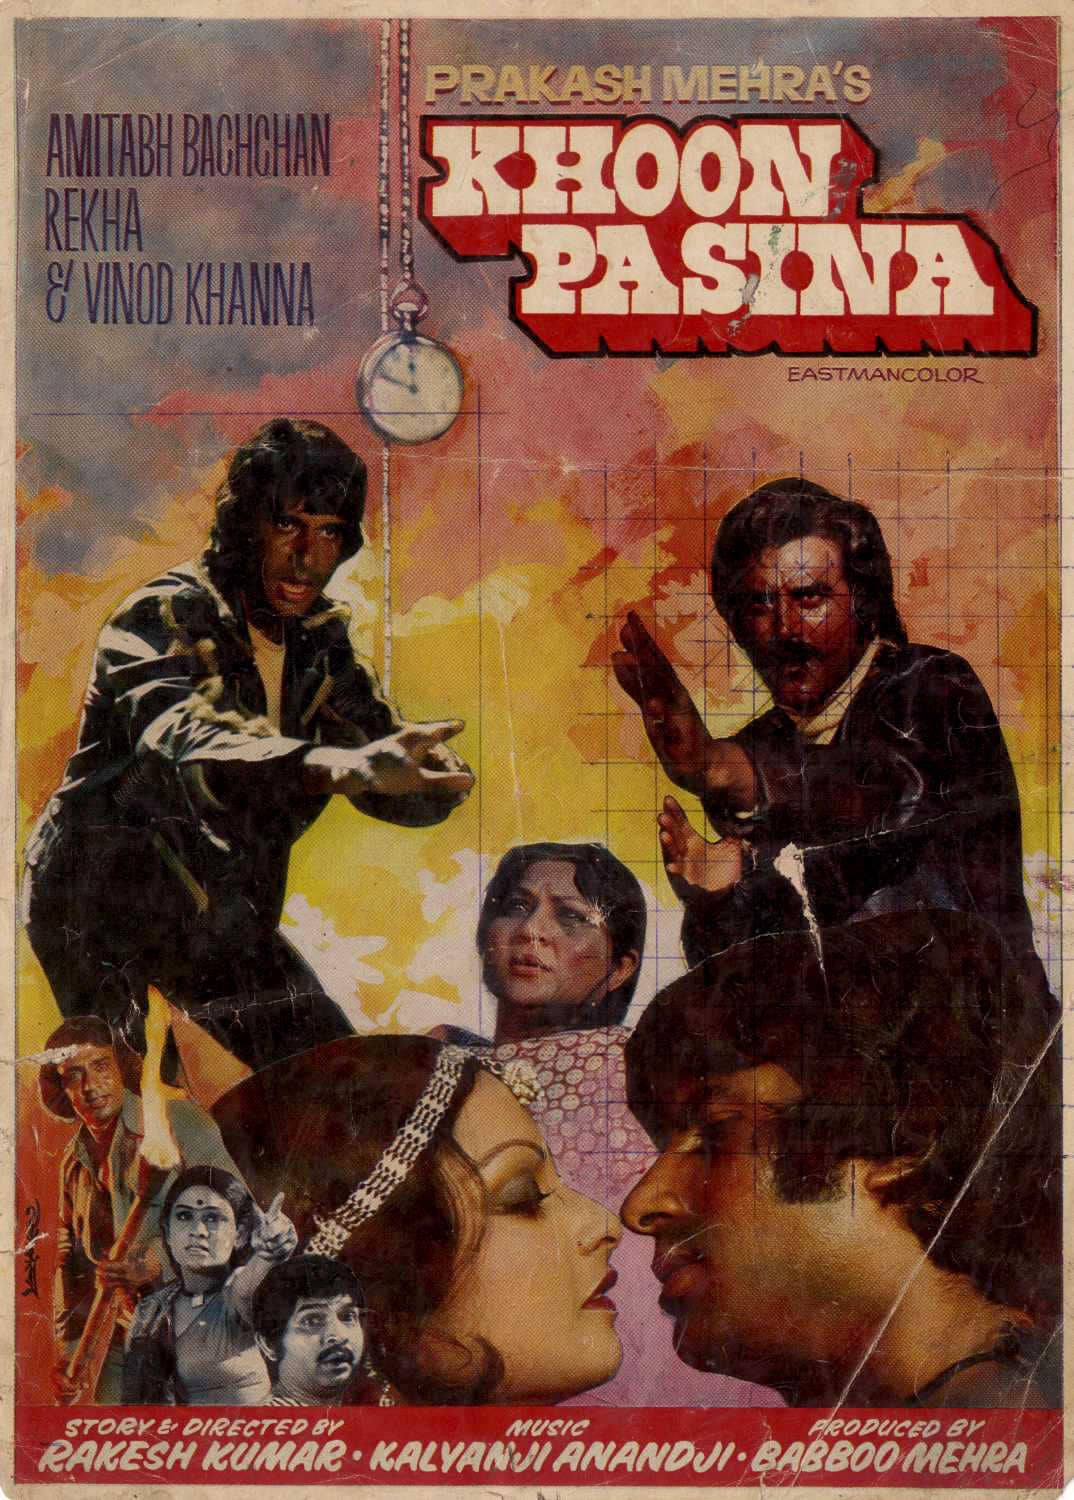 When Election Commission banned Amitabh Bachchan and Rekha Khoon Pasina 1977 Movie in Himachal Pradesh due to assembly elections candidate